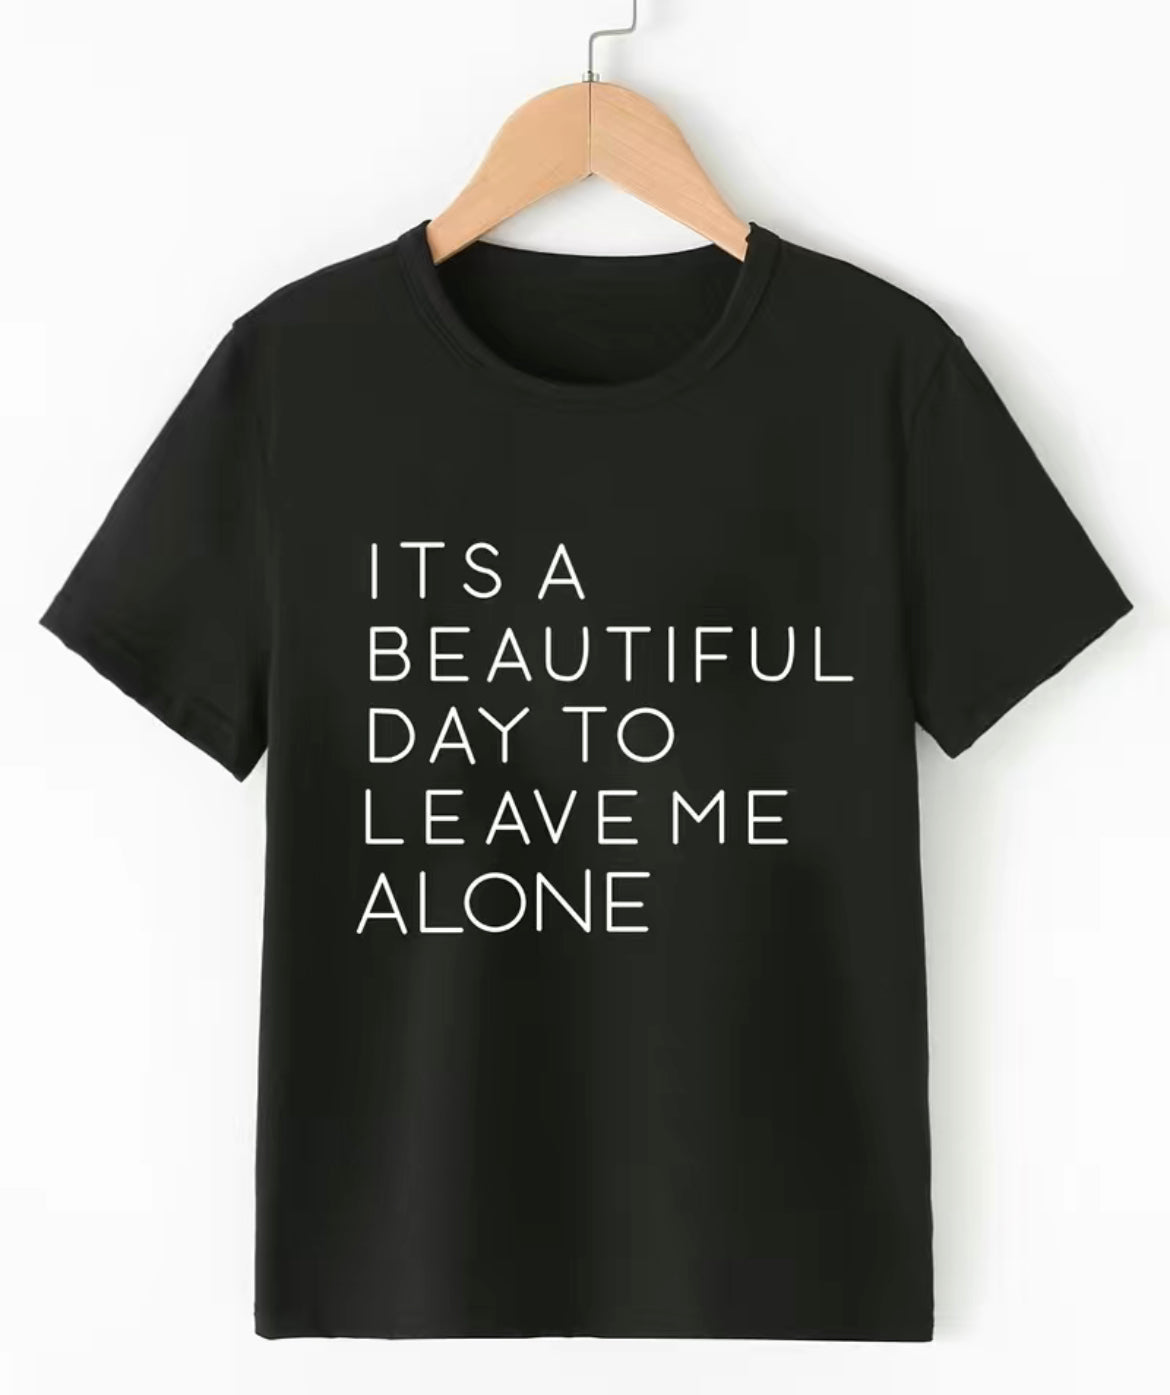 “It’s a Beautiful Day to Leave me Alone” T-Shirt